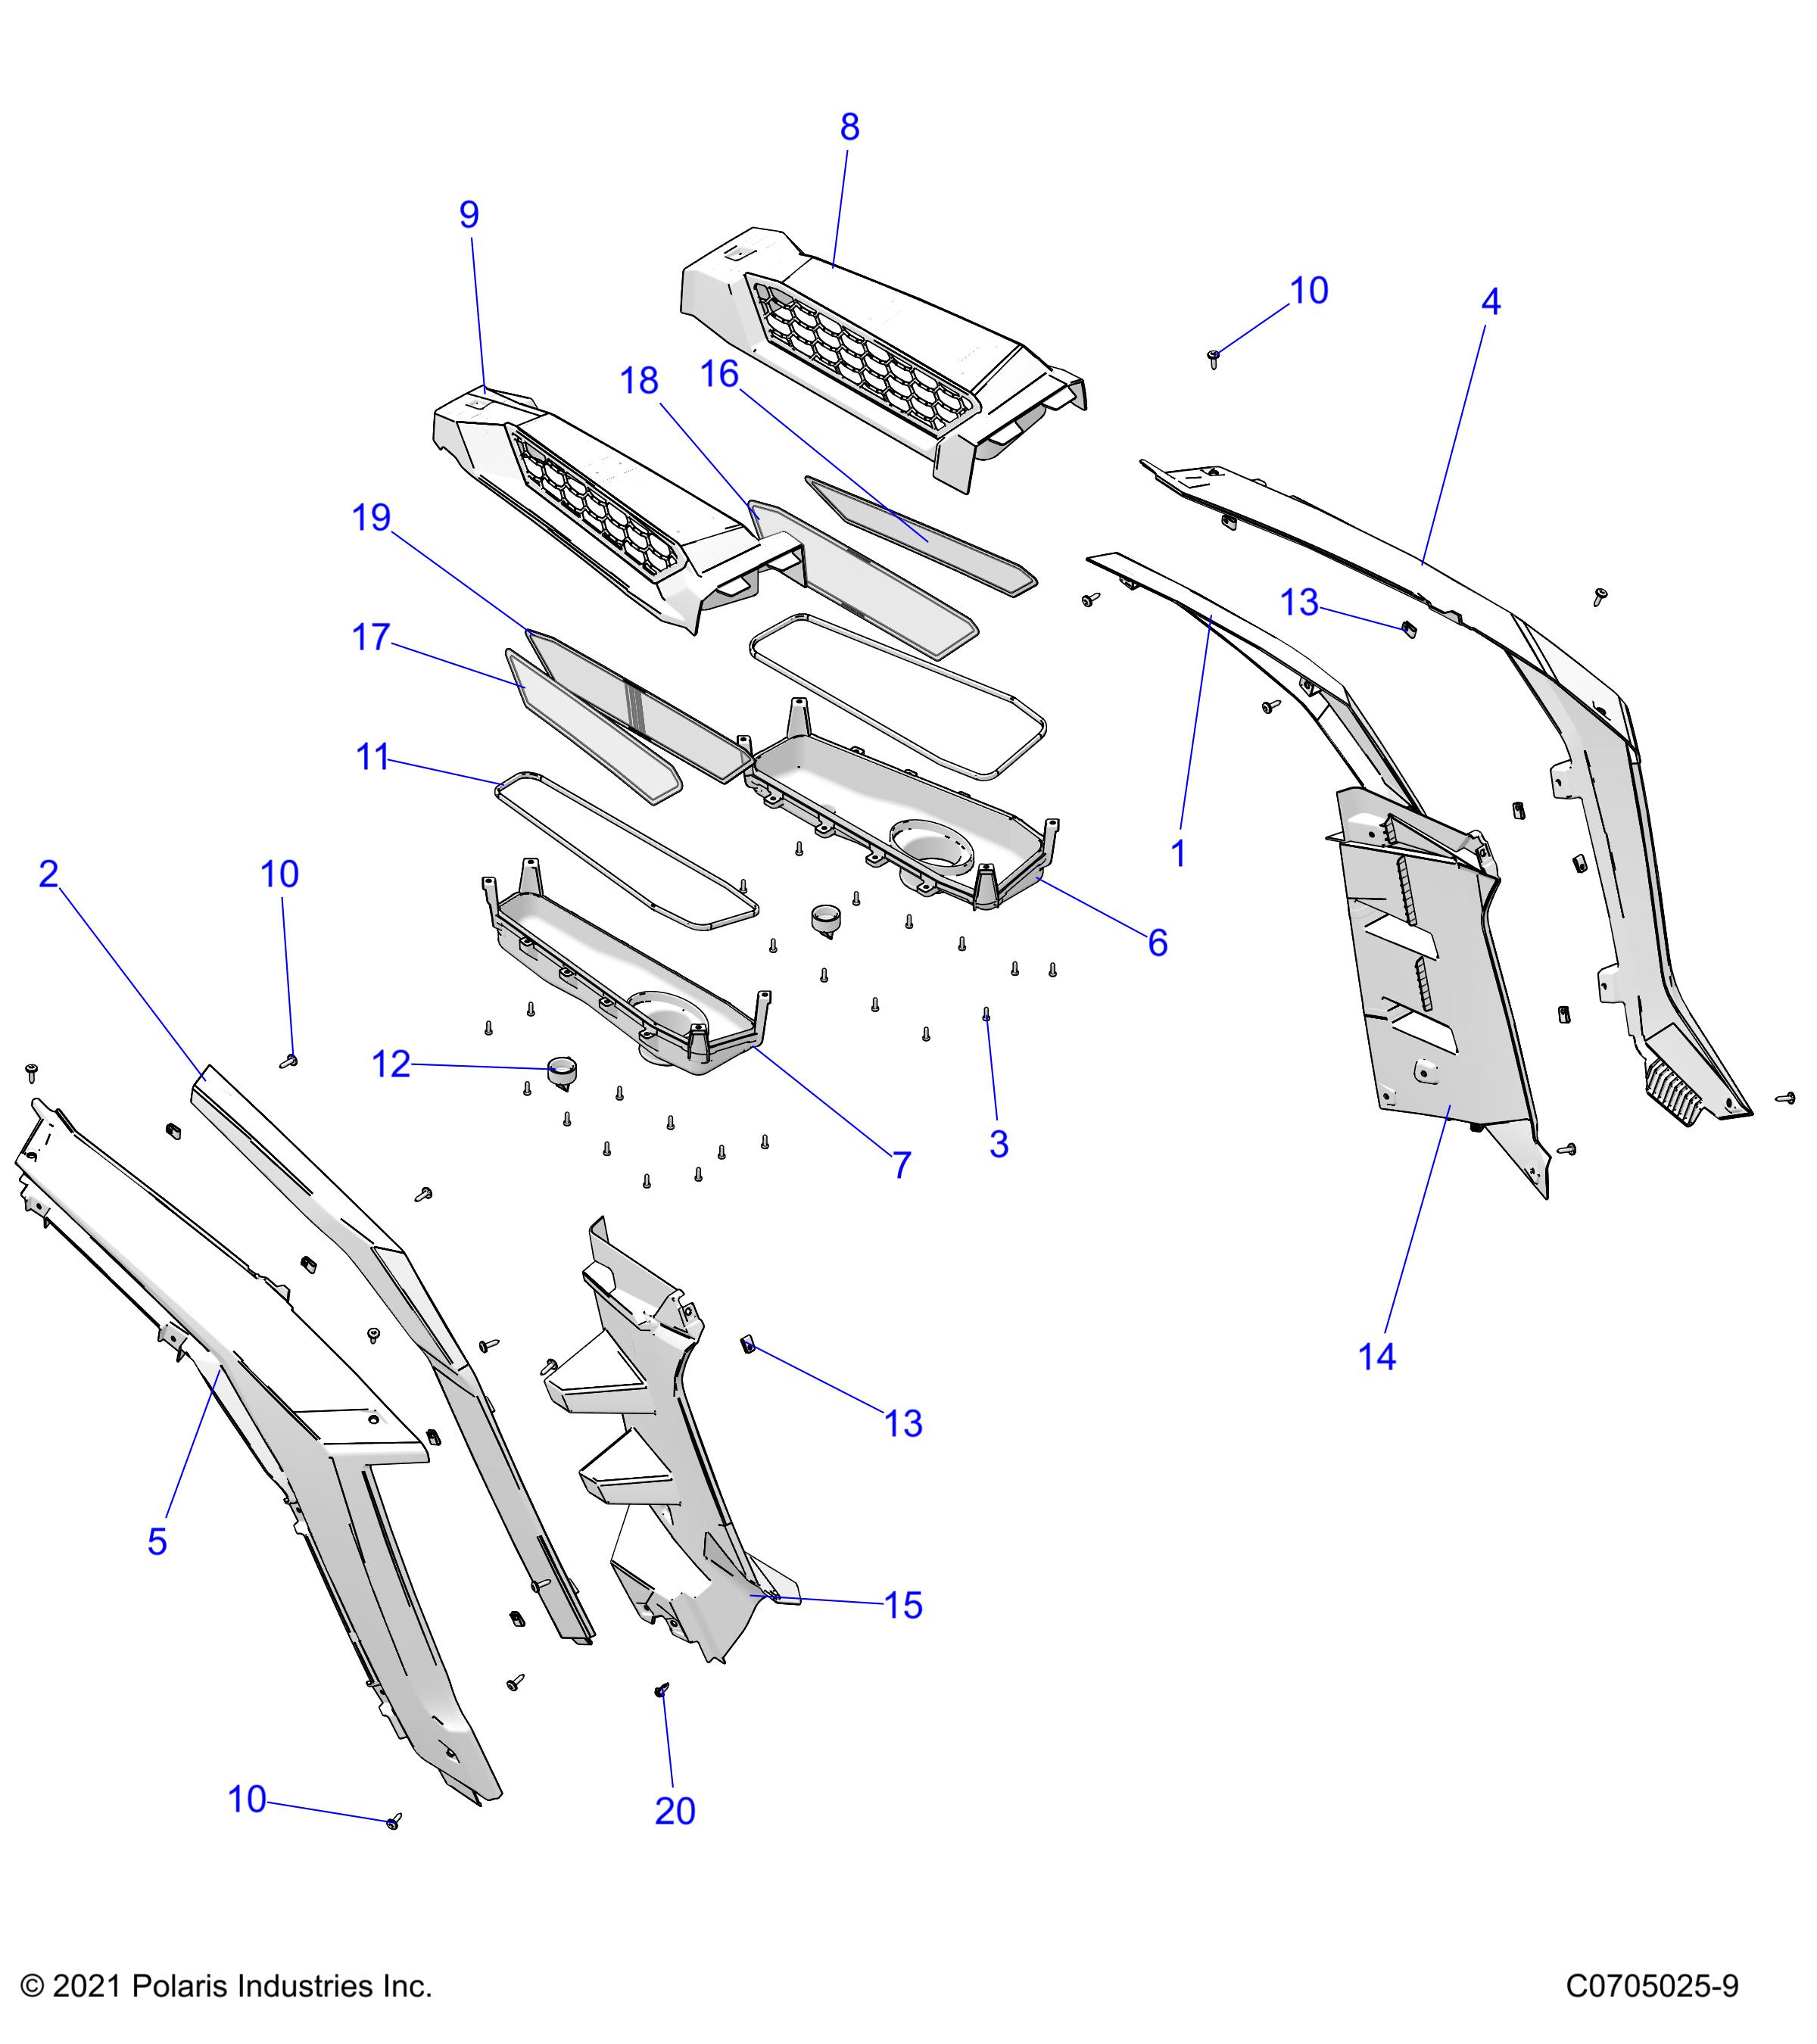 Part Number : 5458016 SCREEN-INTAKE OUTER RH